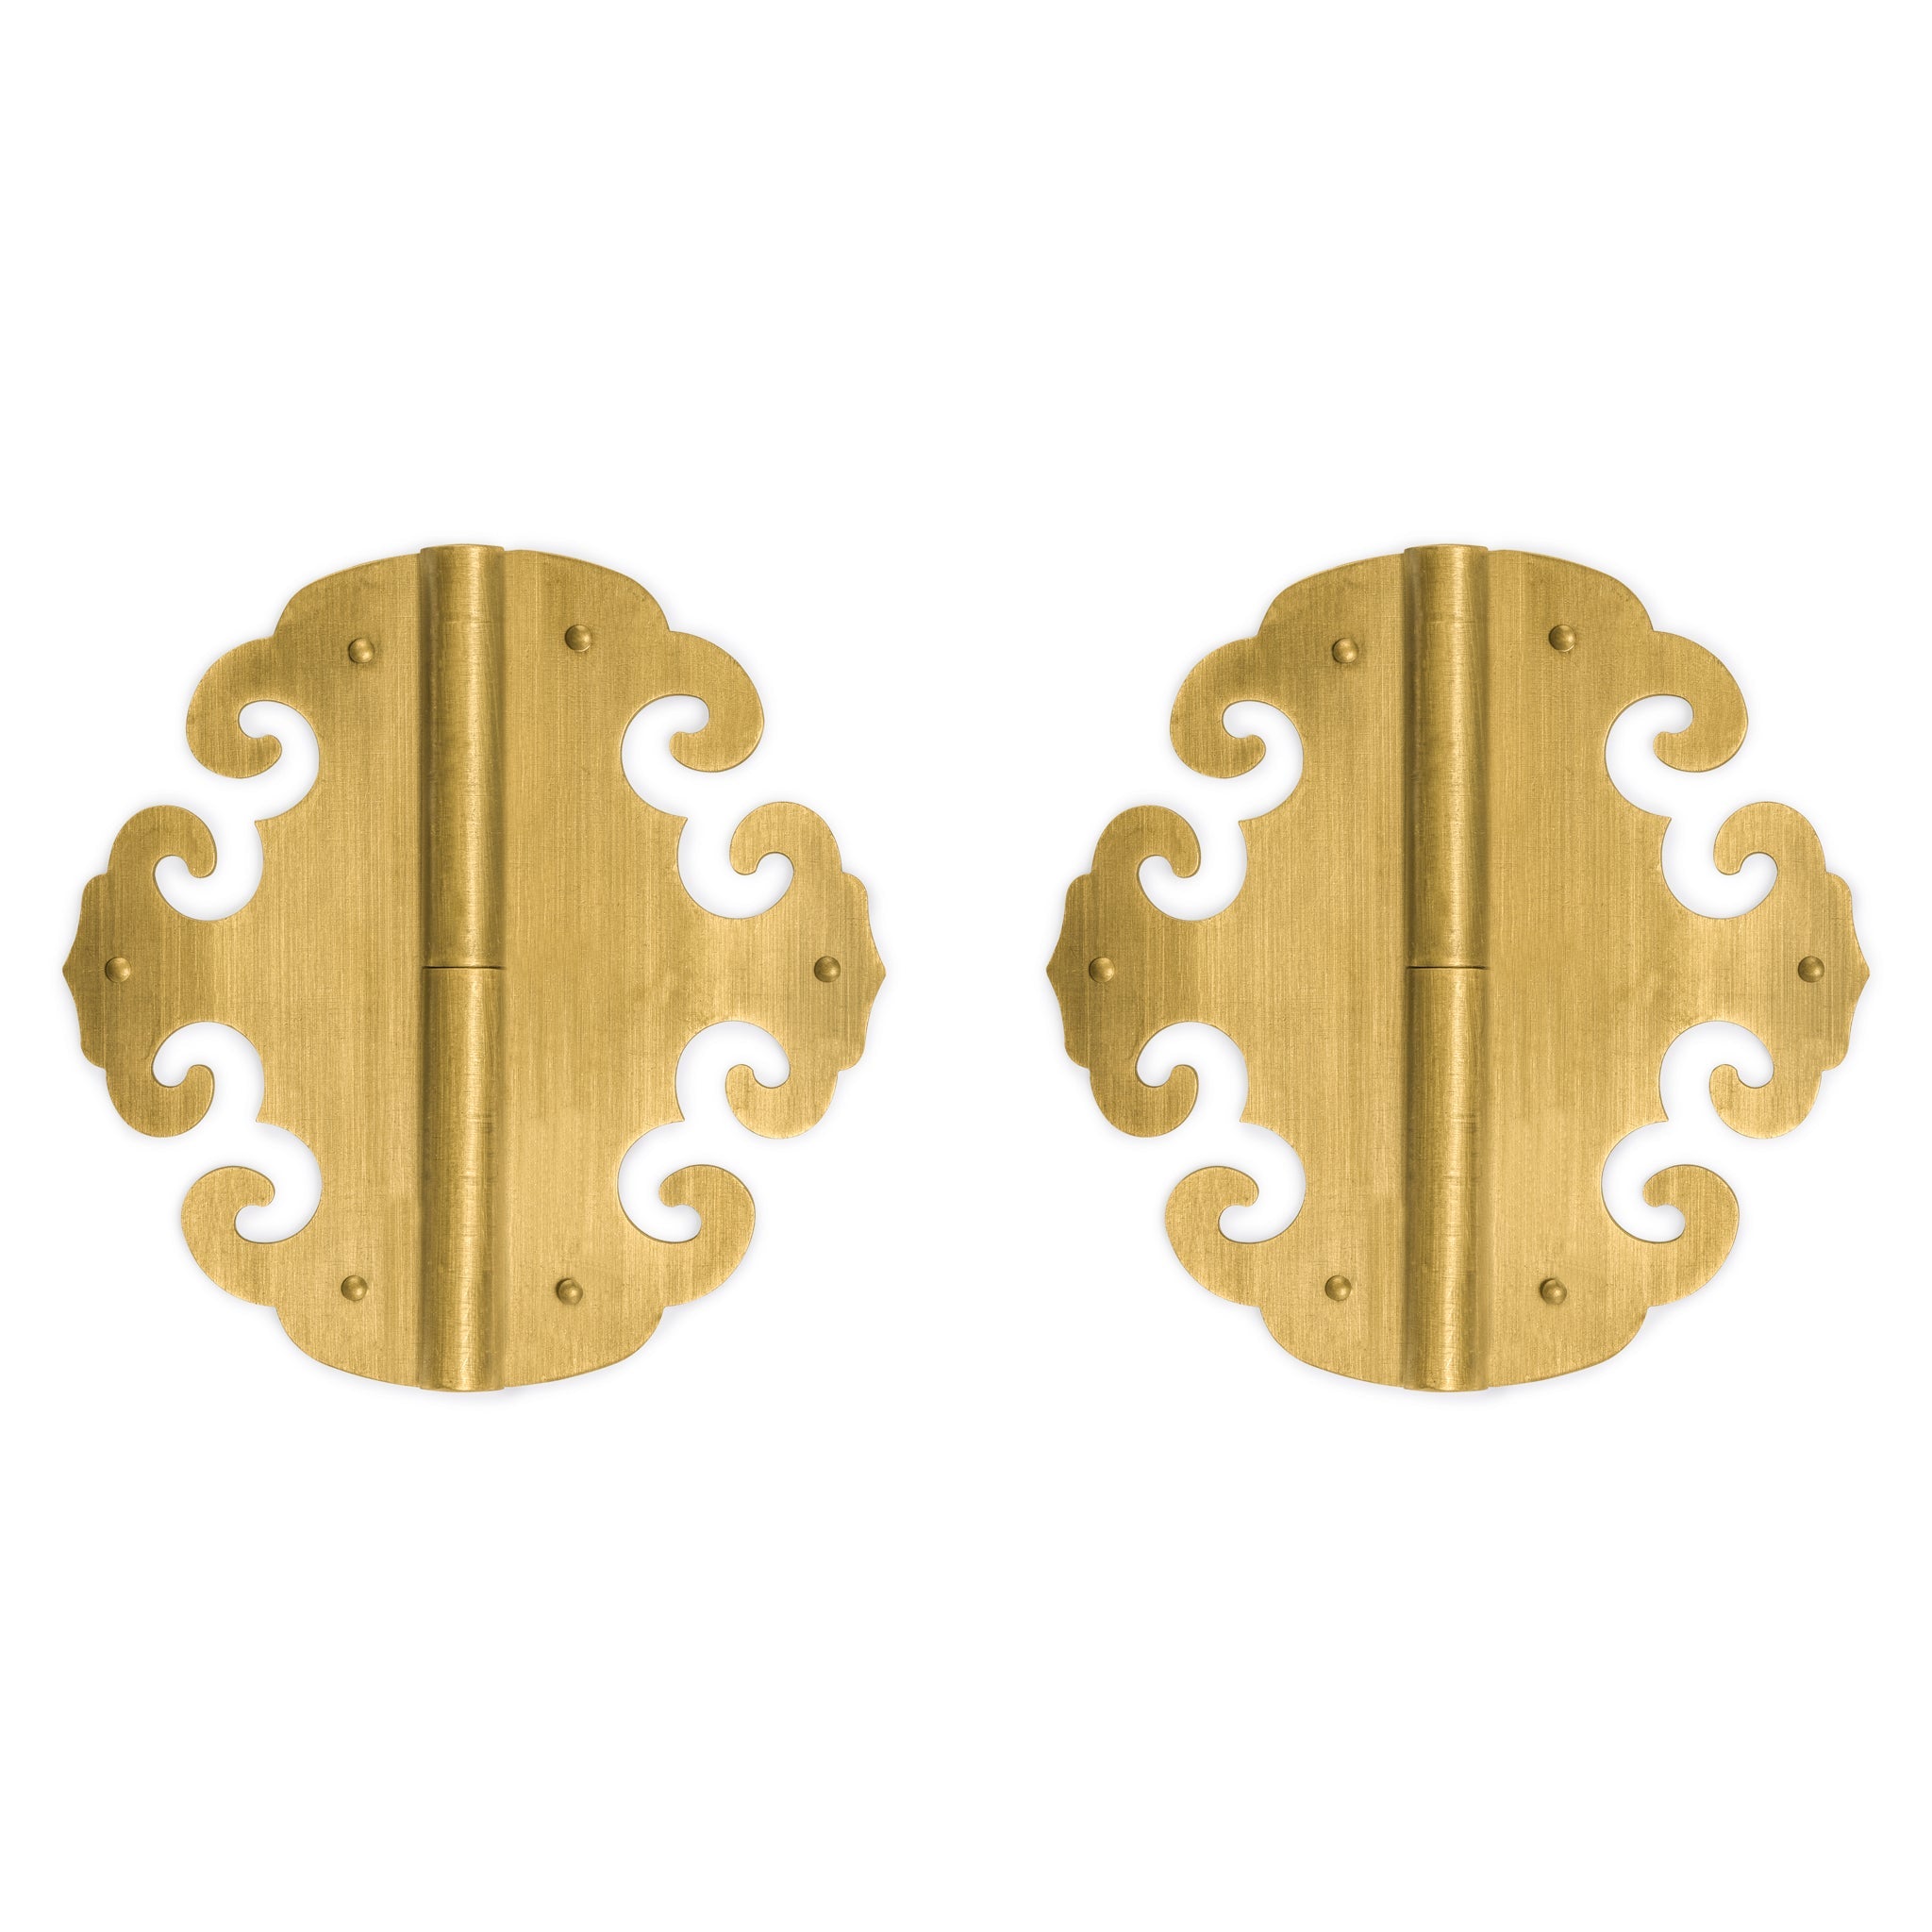 Four Flowers Hinges 4" - Set of 2-Chinese Brass Hardware